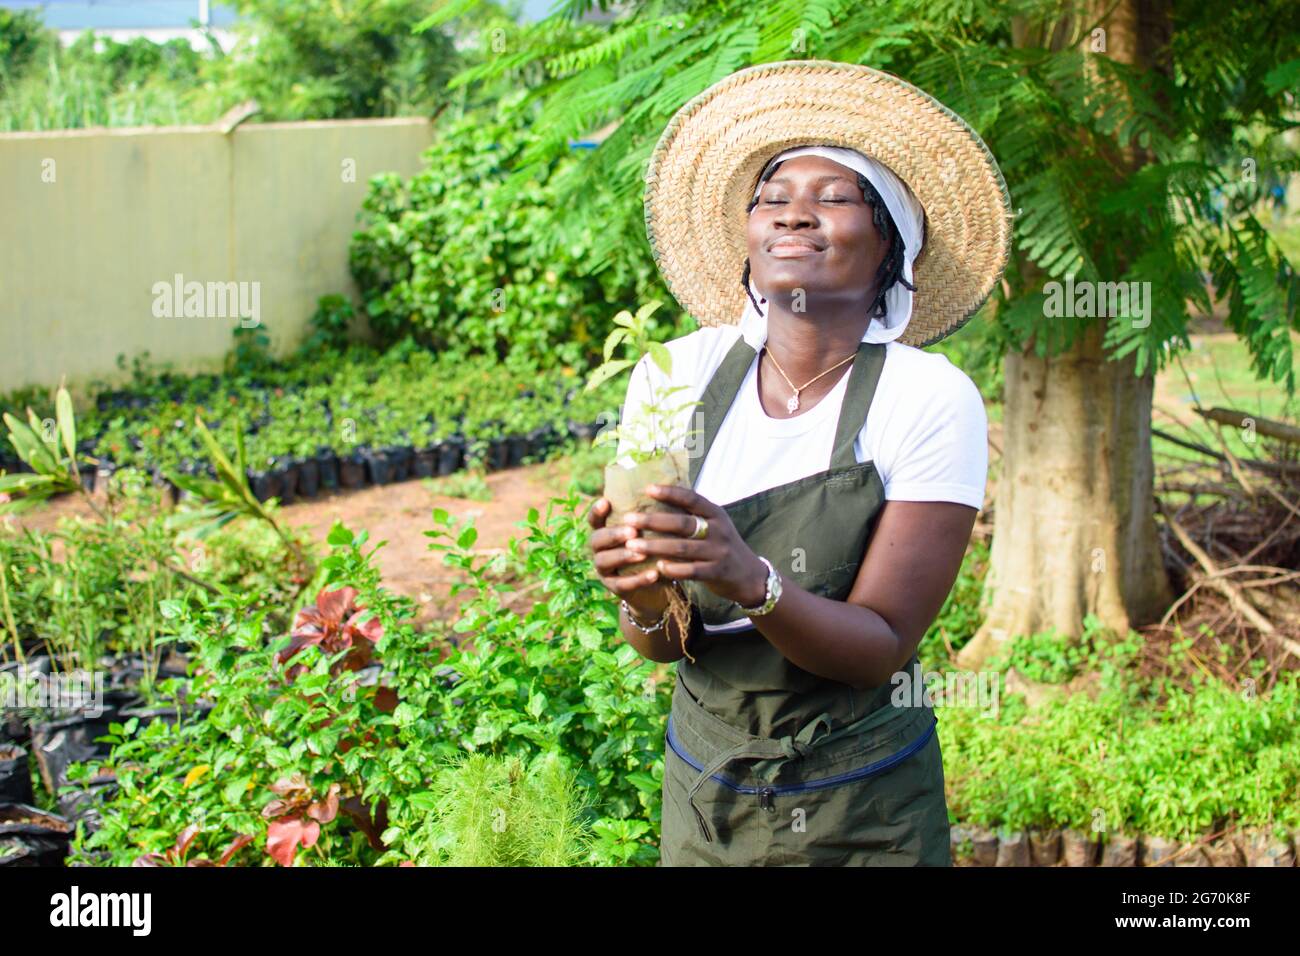 Happy African female gardener, florist or horticulturist wearing an apron and a hat, holding a bag of plant as she works in a green and colorful flowe Stock Photo